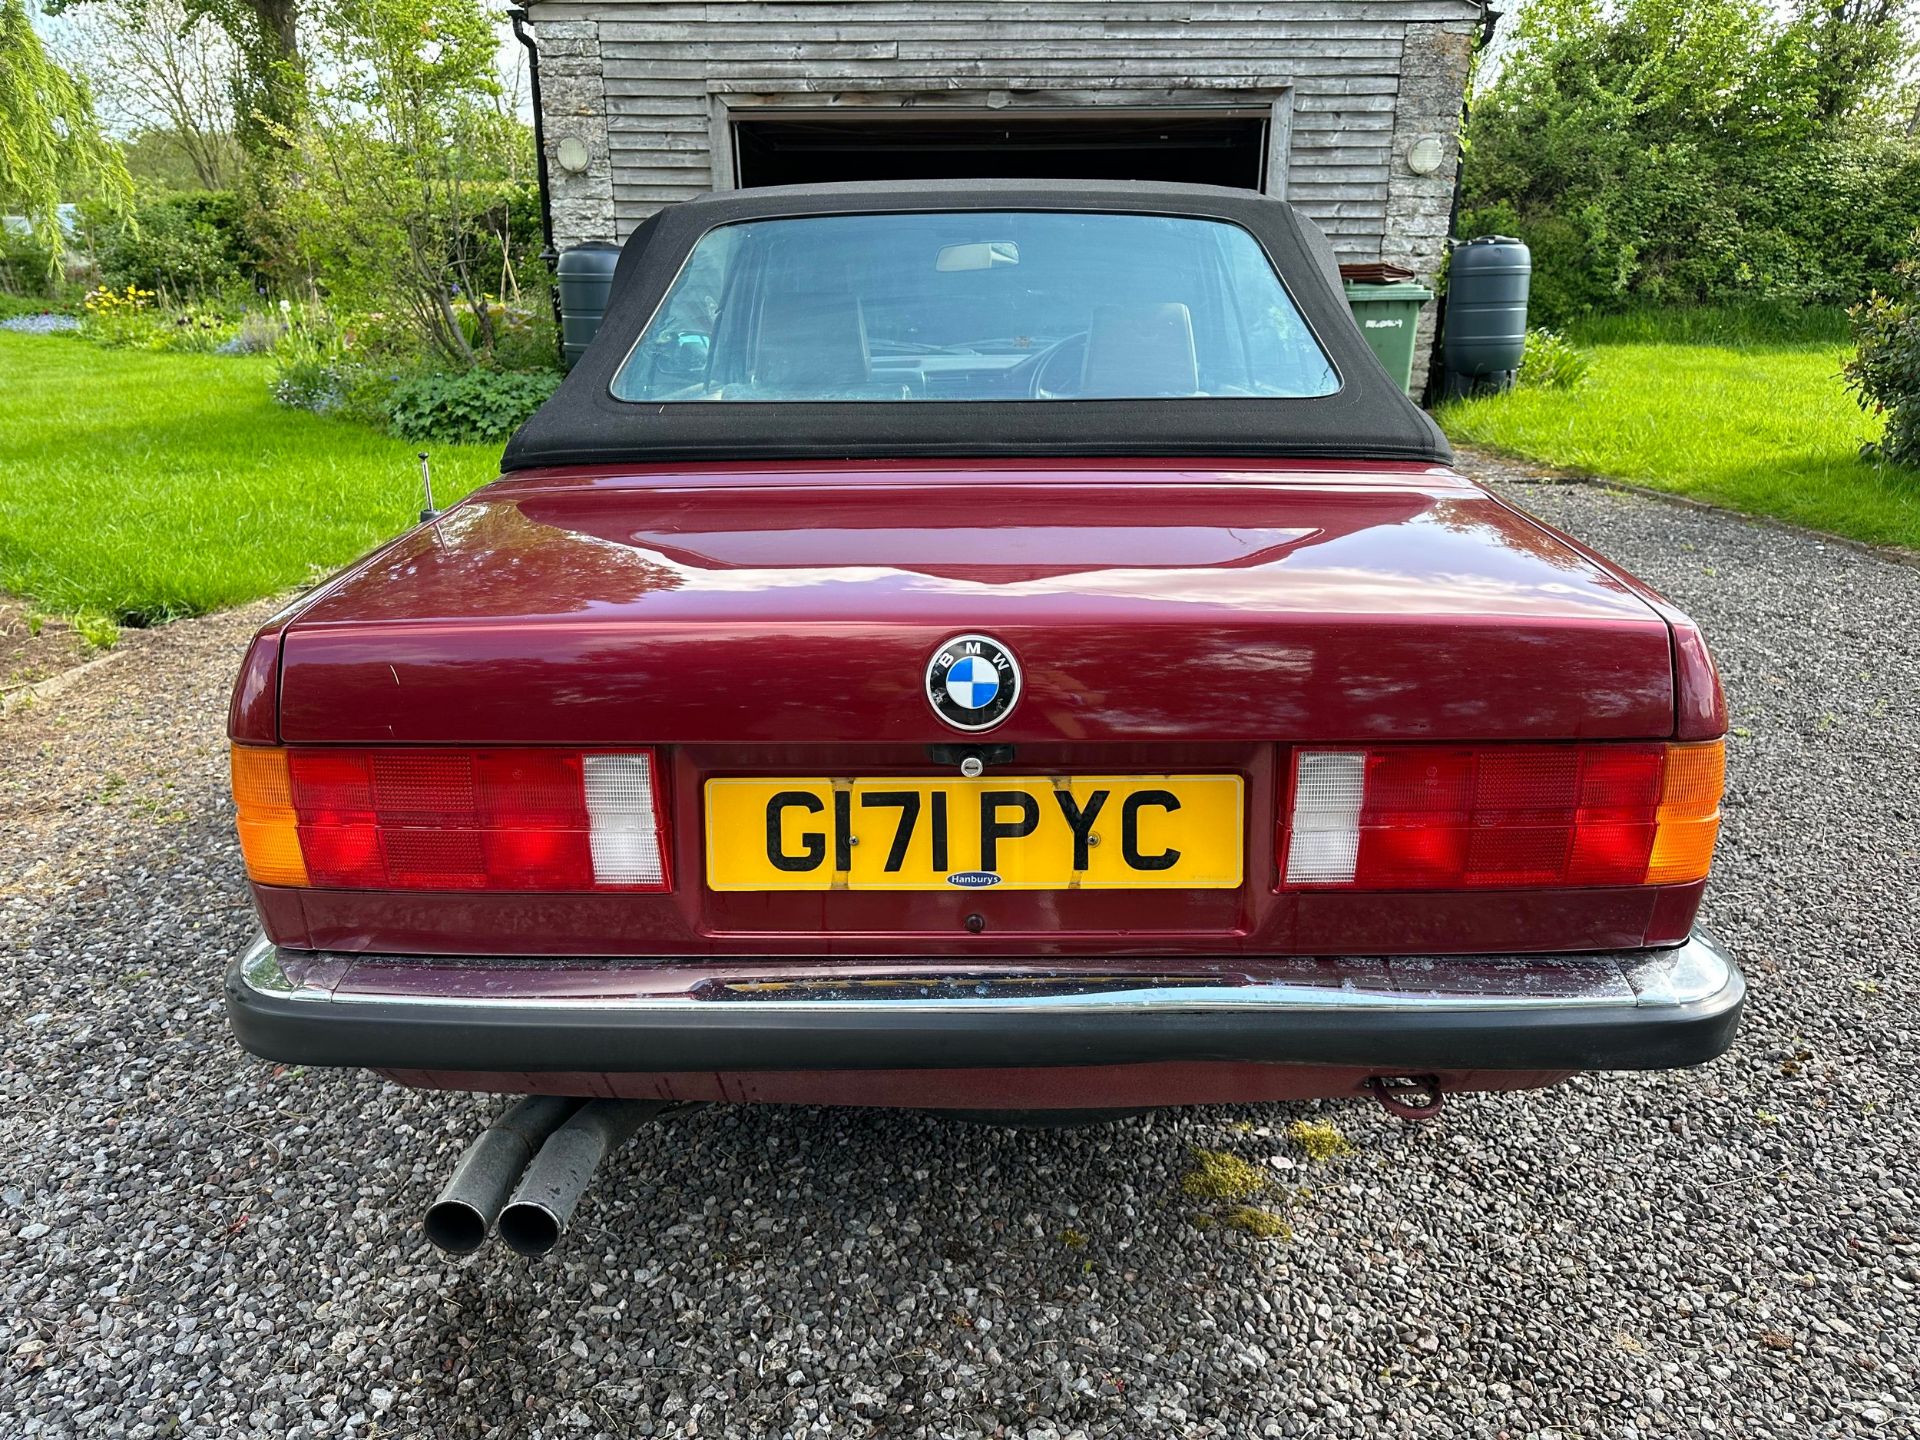 1990 BMW 325i Convertible Registration number G171 PYC Chassis number WBABB12070LB95832 Engine - Image 13 of 67